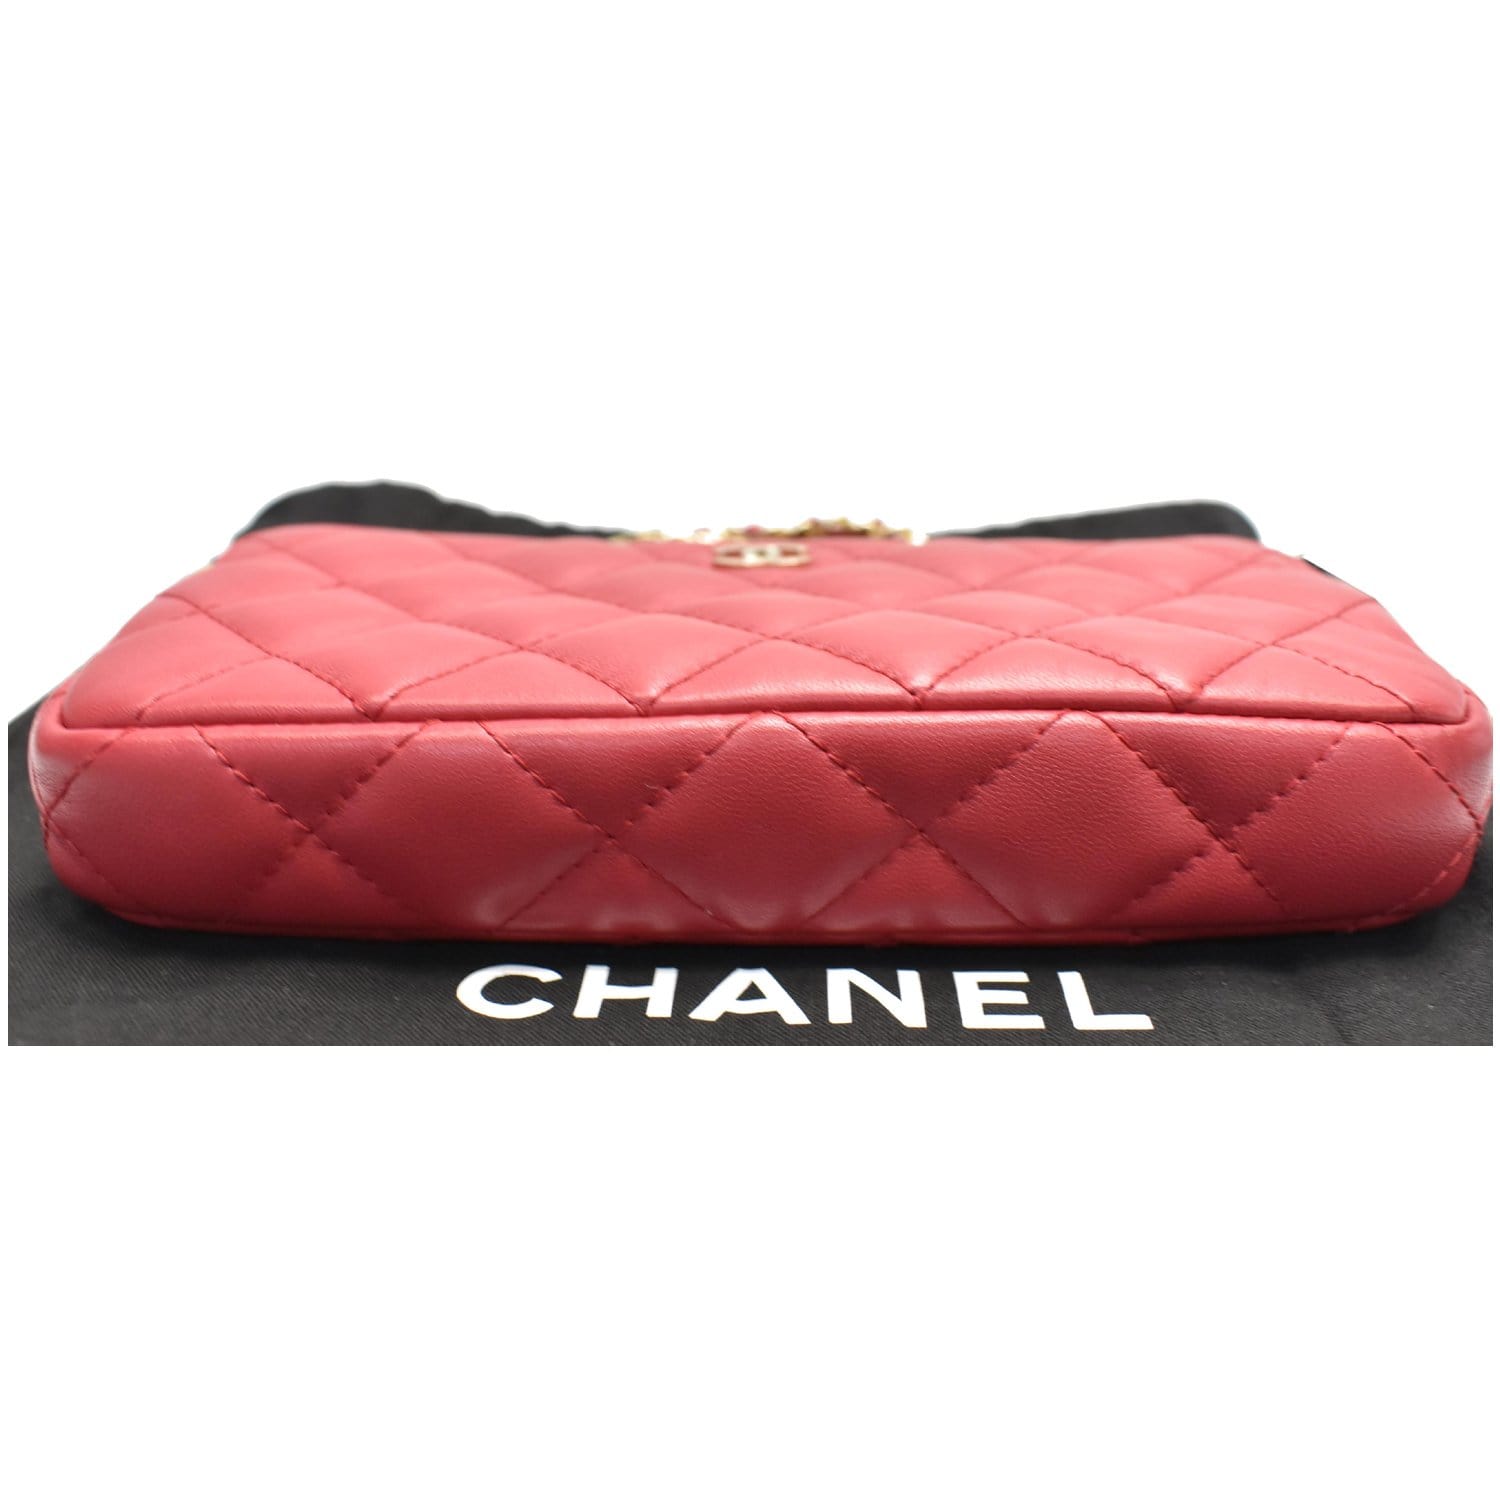 CHANEL 🌸 2020 20C 19 Flap Small Pink 🌸 Bag Classic Gold Silver